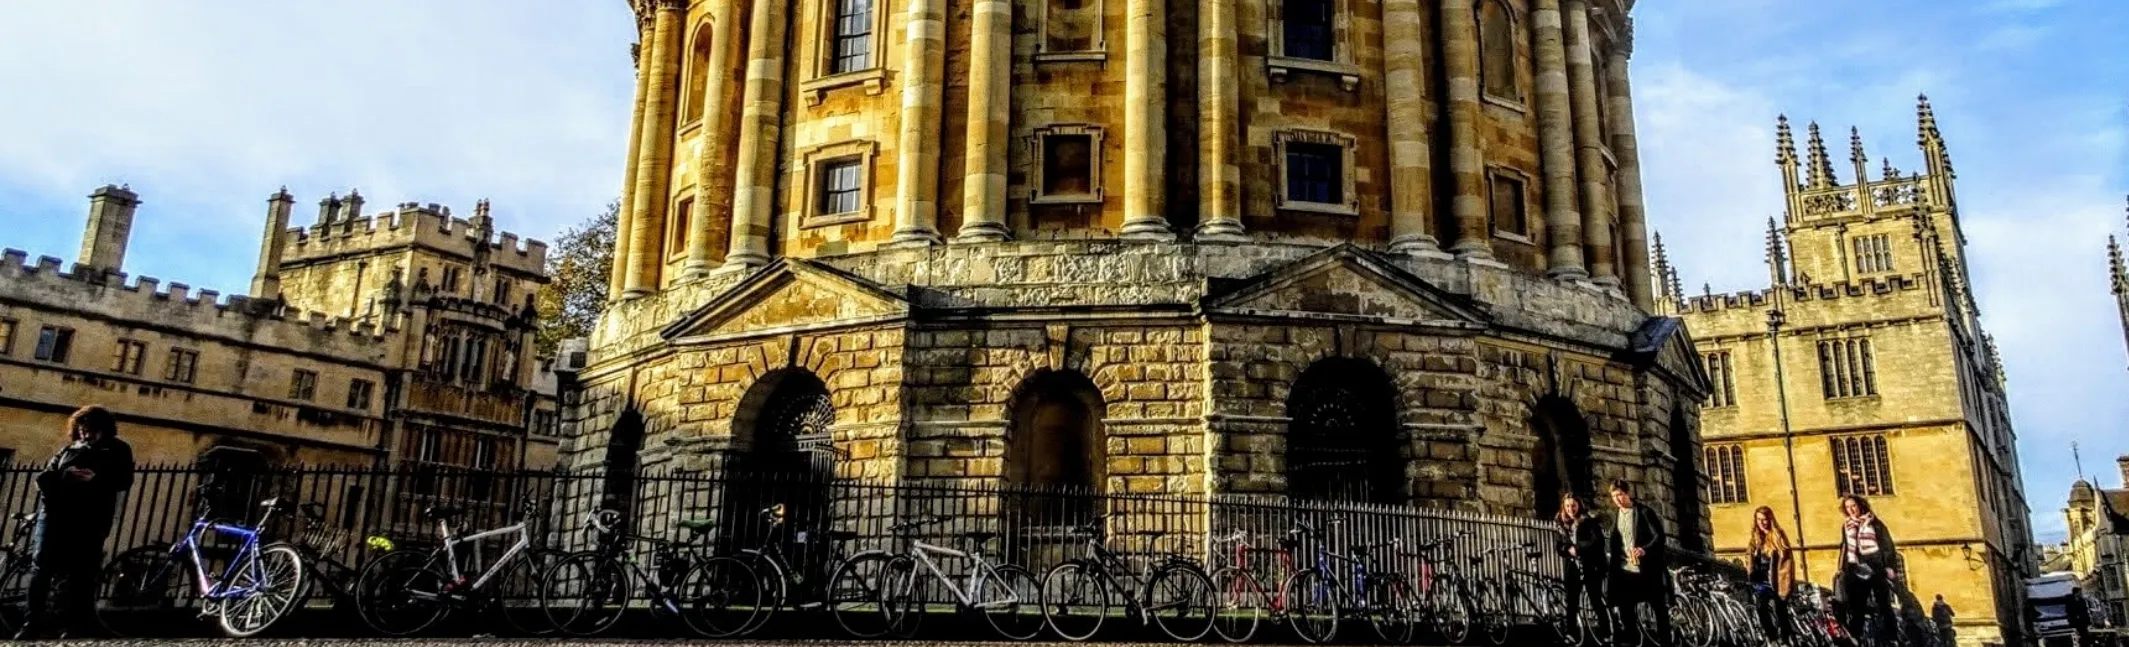 Poster Radcliffe Camera